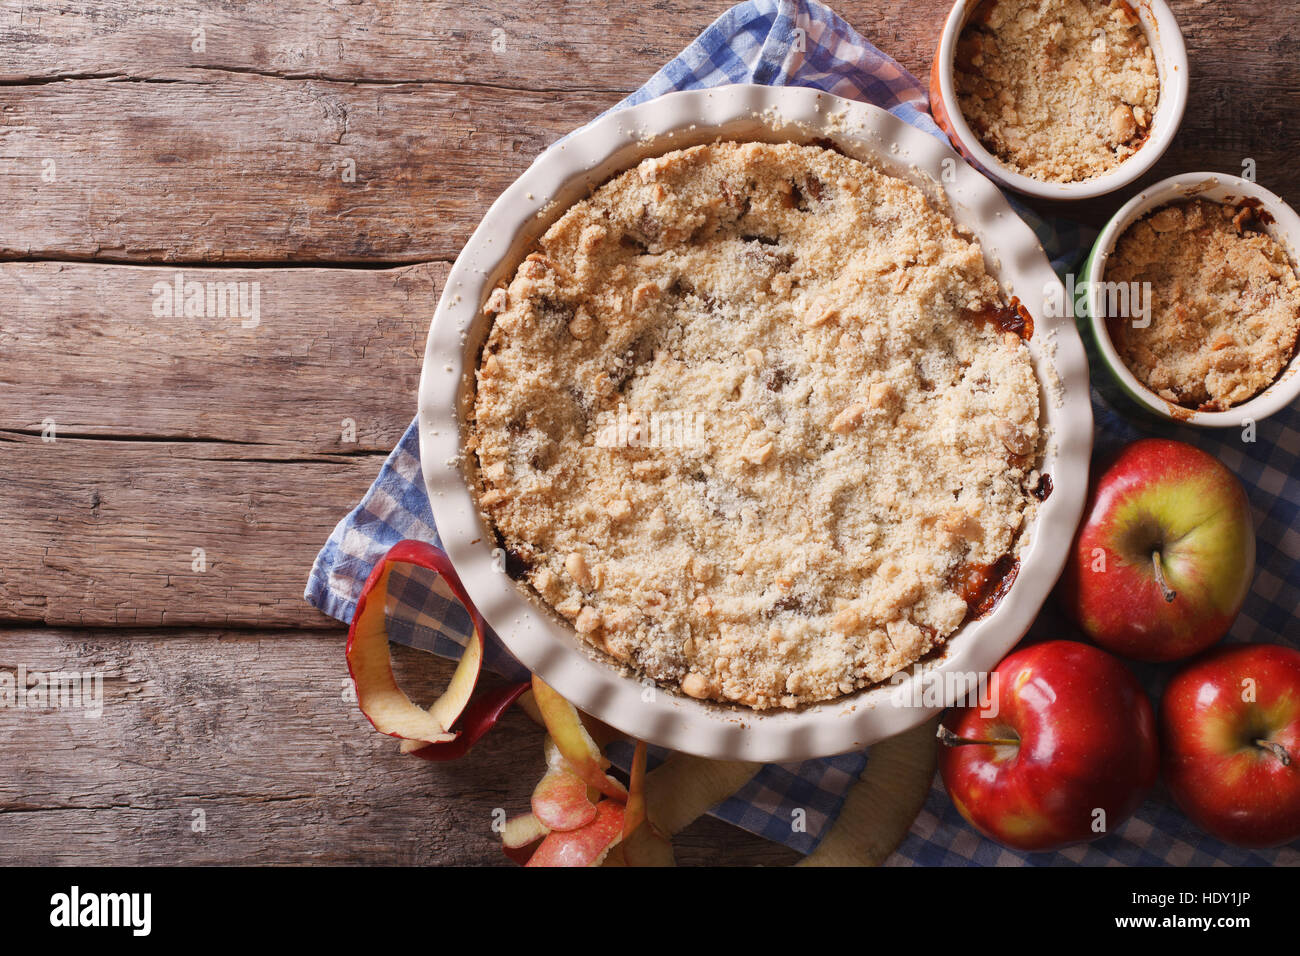 Traditional apple crisp close-up in baking dish. view from above horizontal, rustic style Stock Photo